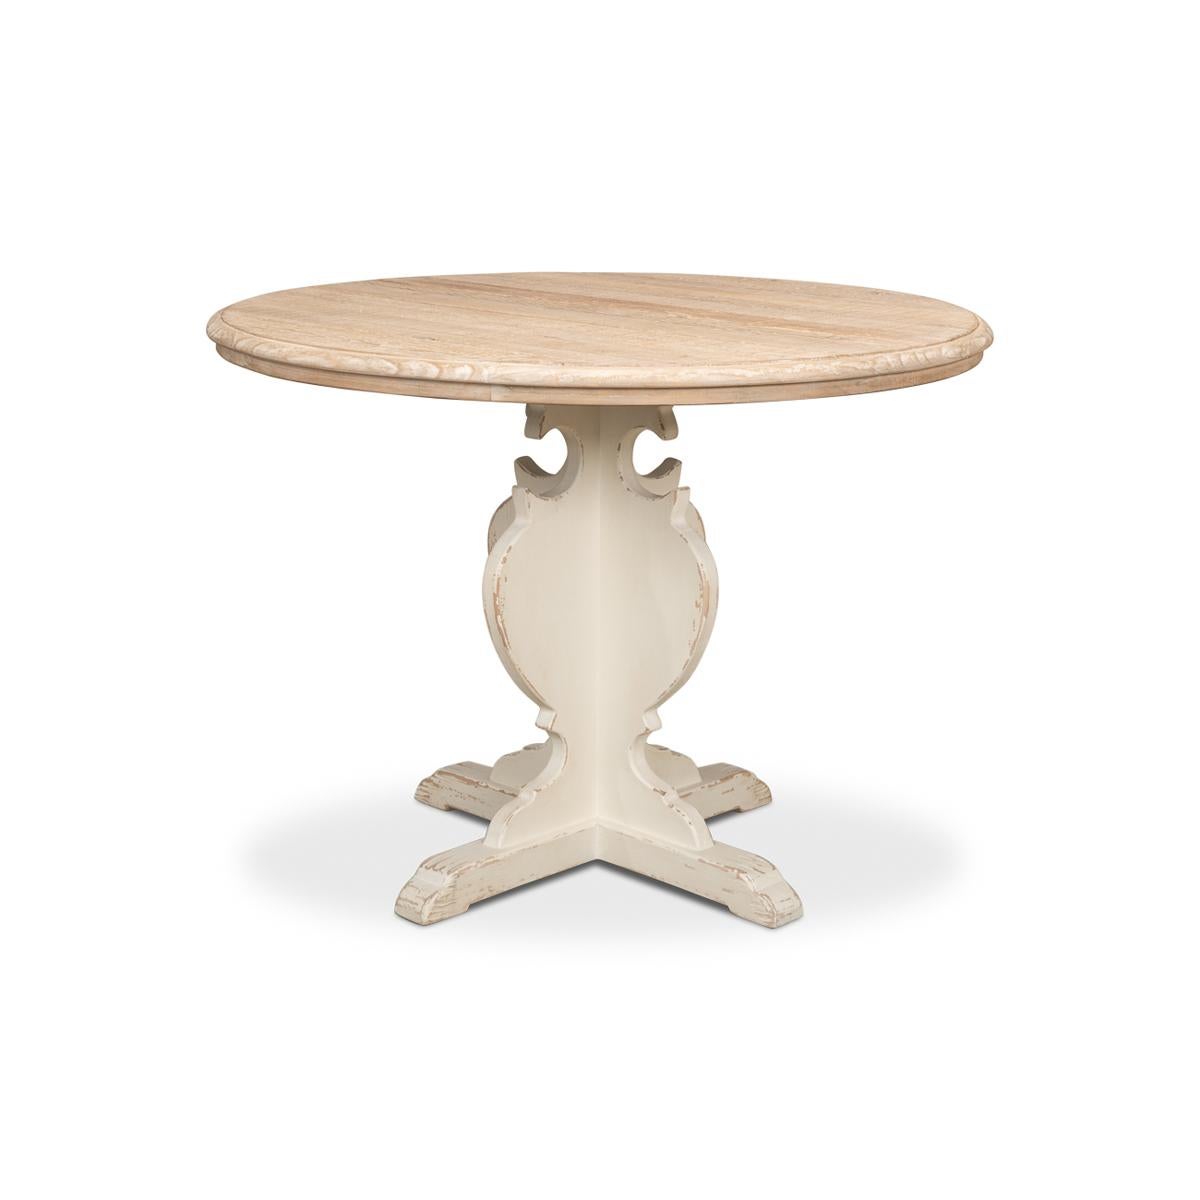 Introducing our reclaimed pine French Bistro table, the perfect addition to any dining space. The round pine wood top is finished in a natural tone, giving it a warm and inviting feel, while the antiqued and distressed white-painted pedestal base